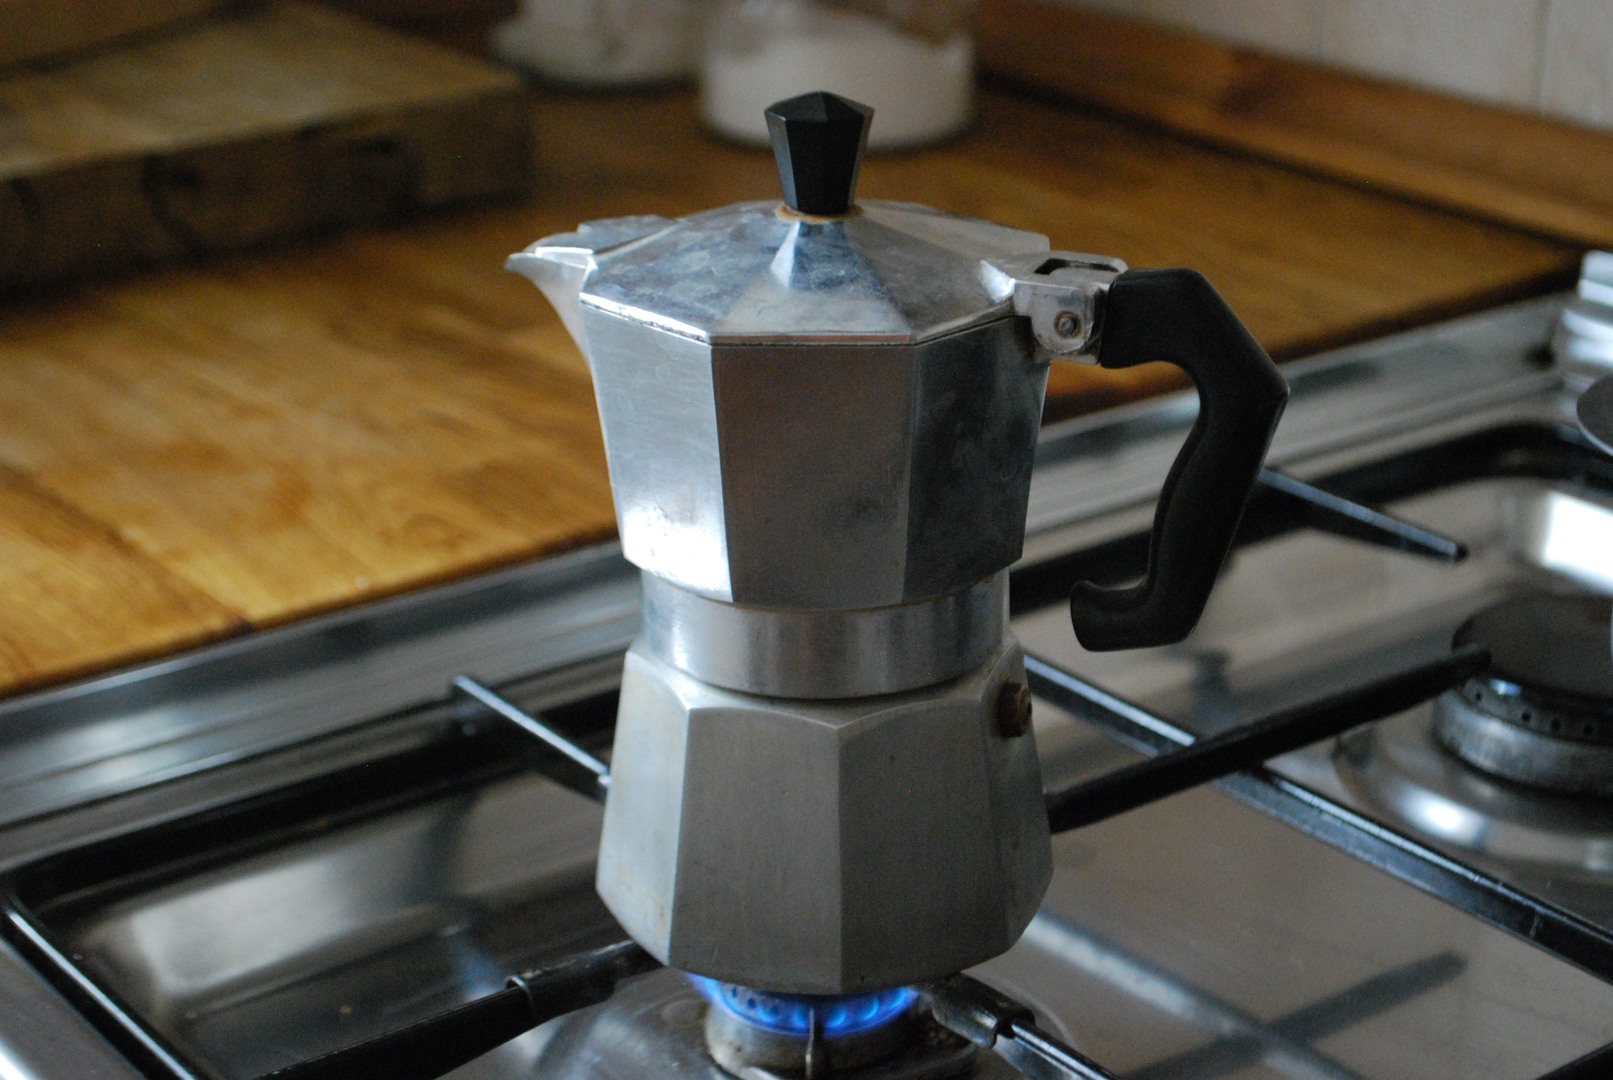 How Does a Coffee Percolator Work?